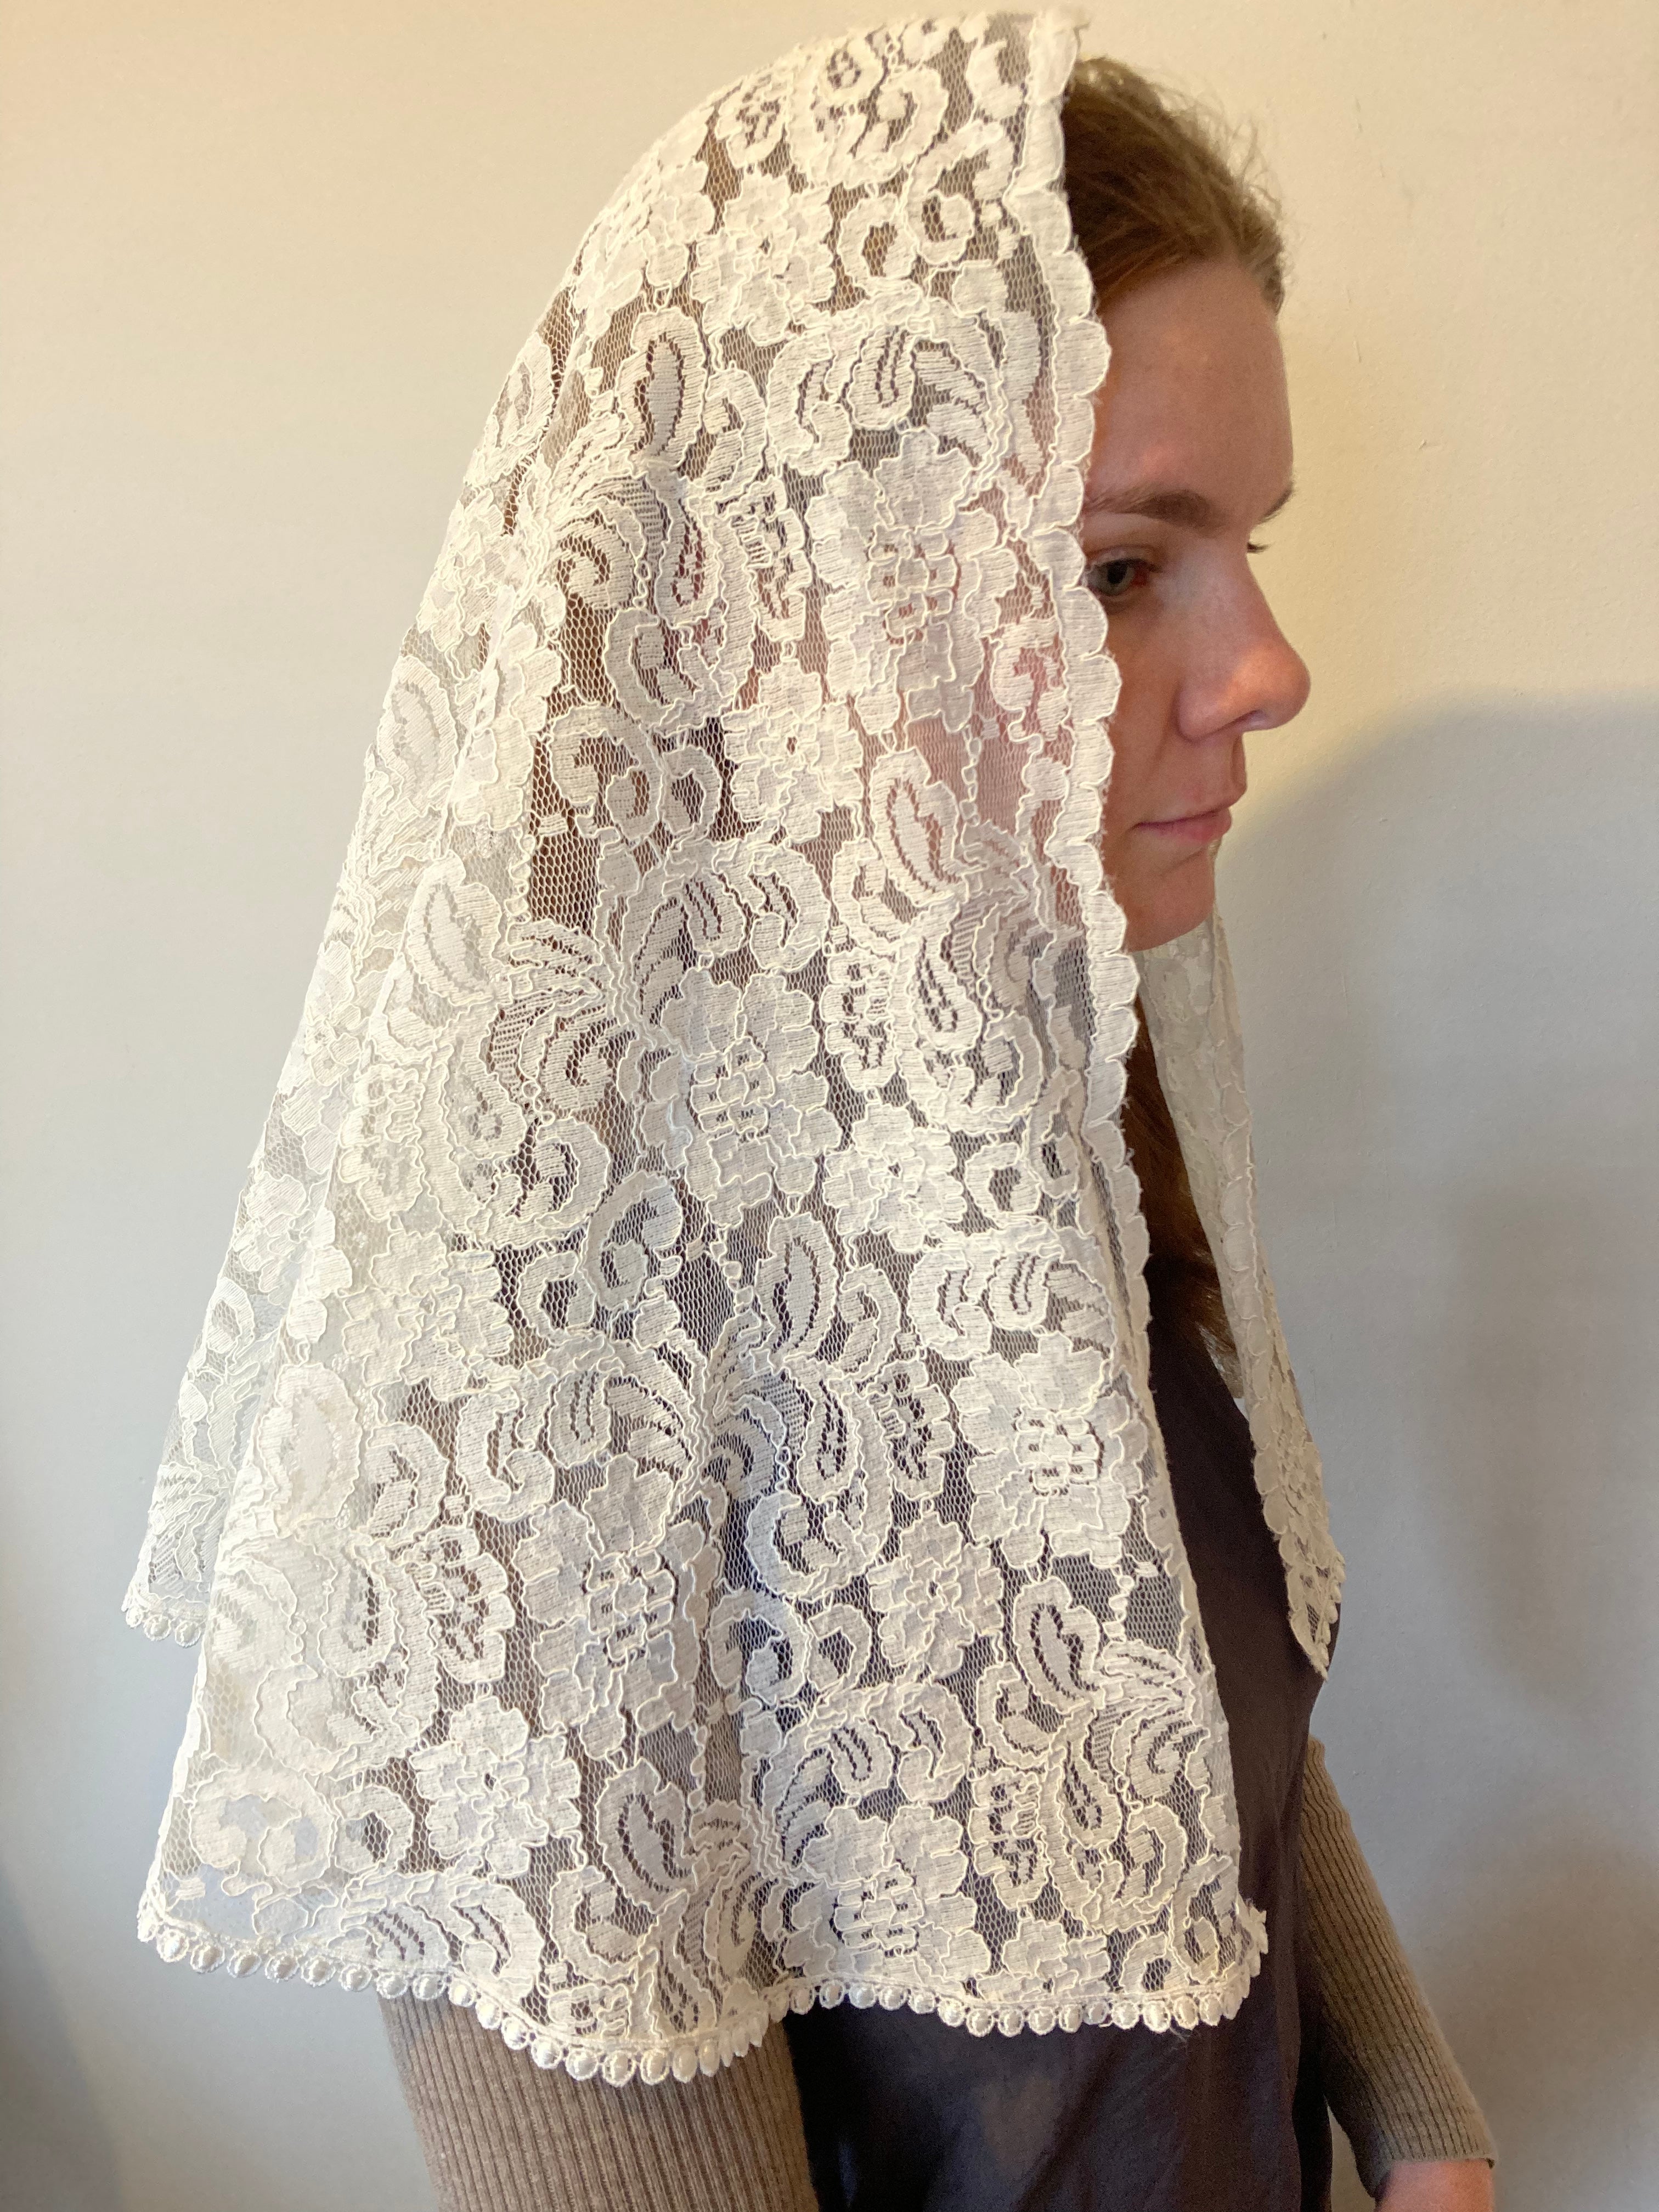 Our Lady of the Rosary veil